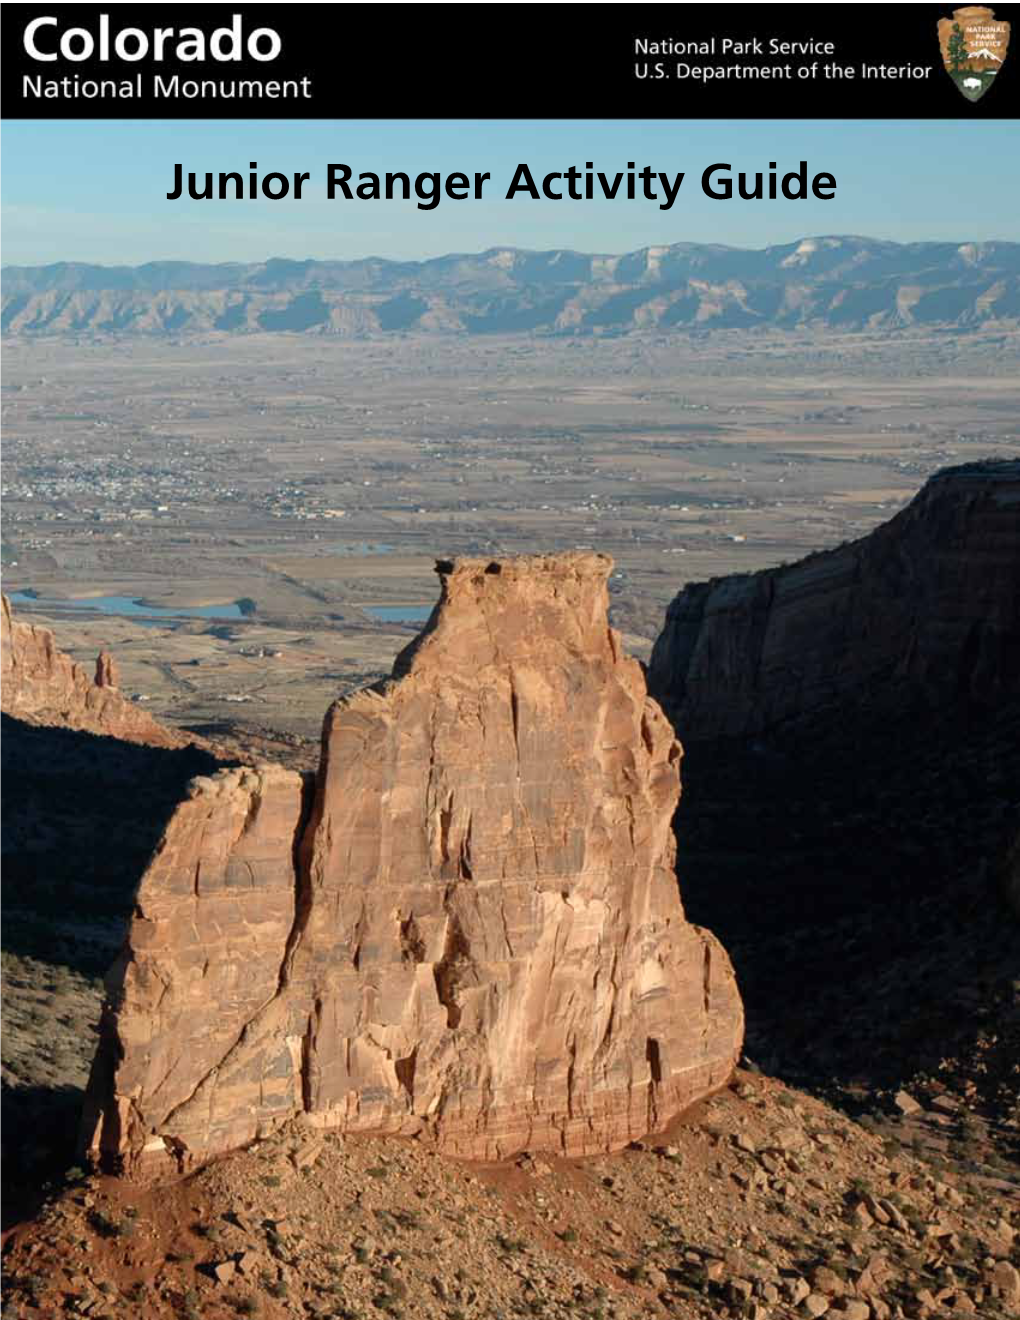 Junior Ranger Activity Guide Welcome to Colorado National Monument! What’S Right/What’S Wrong?